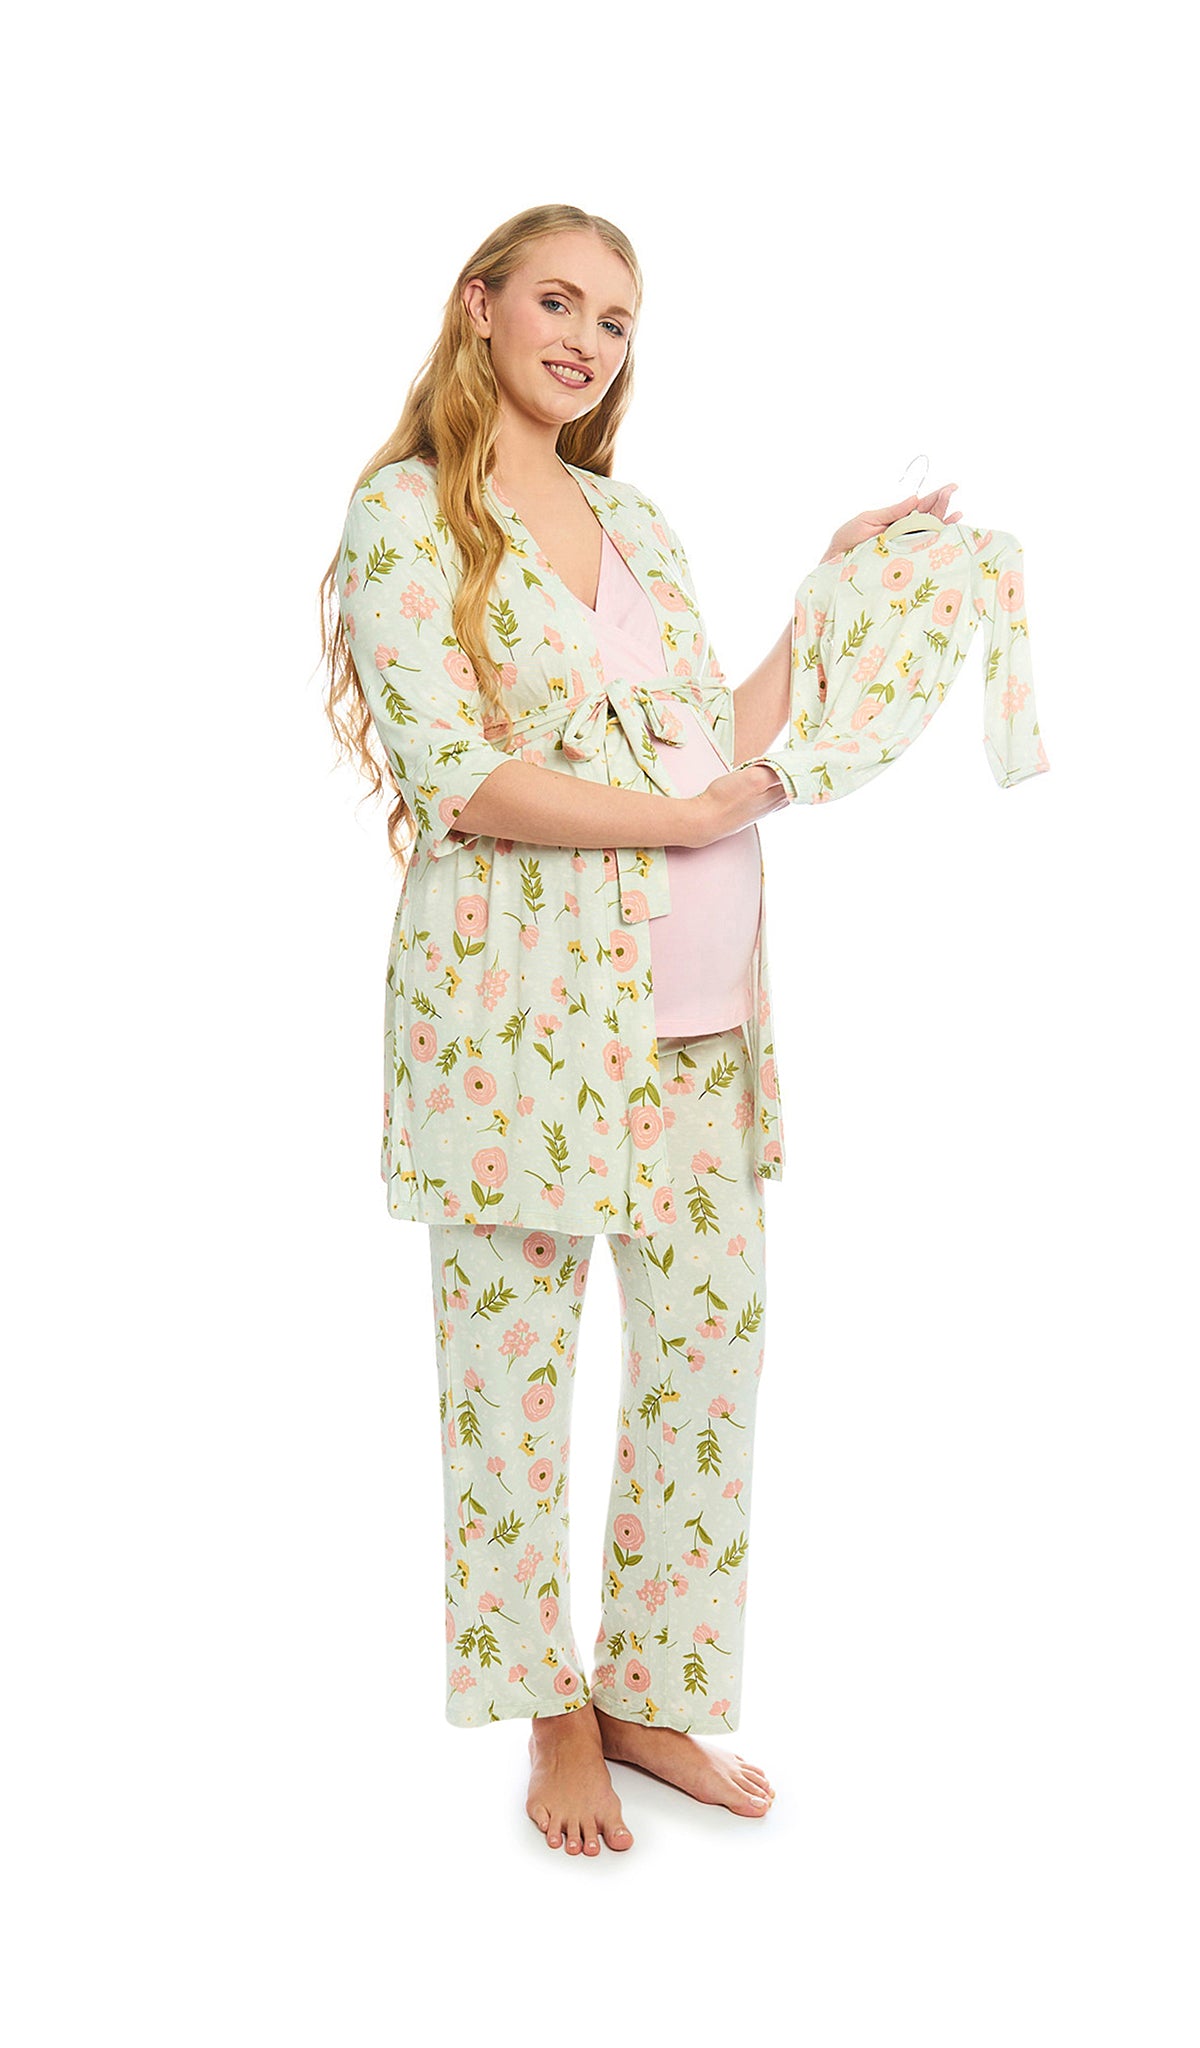 Carnation Analise 5-Piece Set. Pregnant woman wearing 3/4 sleeve robe, tank top and pant while holding a baby gown.